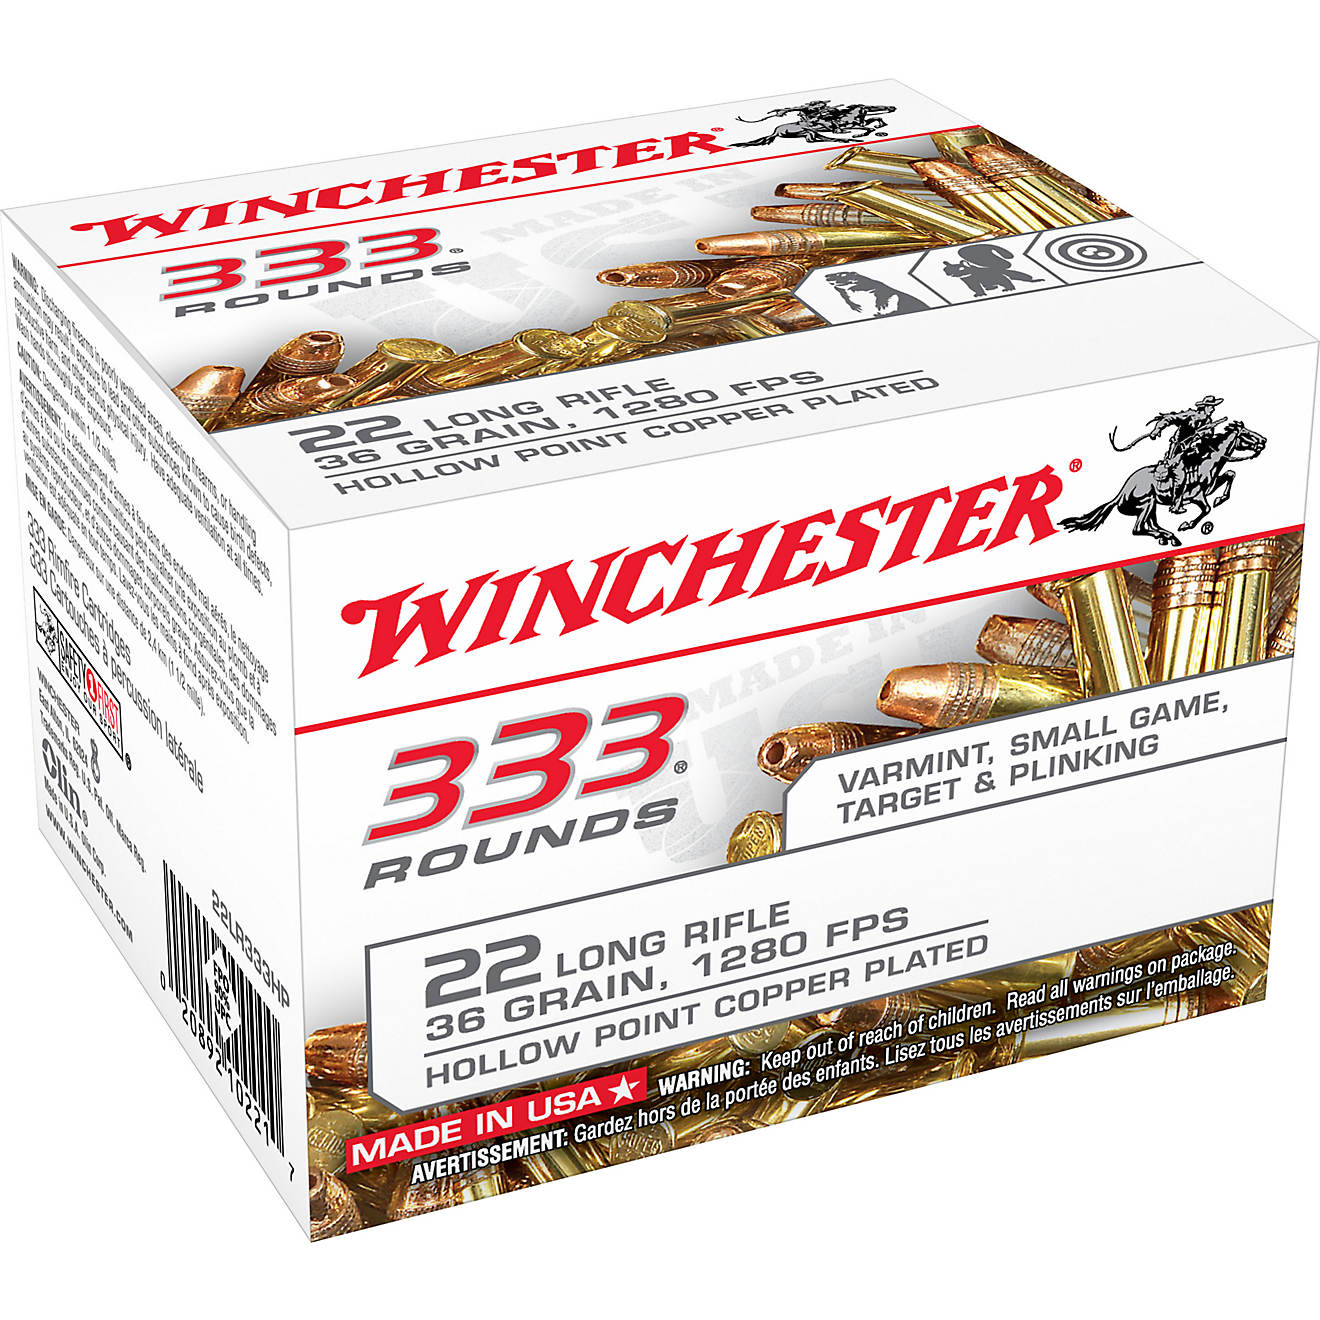 Winchester 333 .22 Long Rifle 36-Grain Ammunition - 333 Rounds                                                                   - view number 1